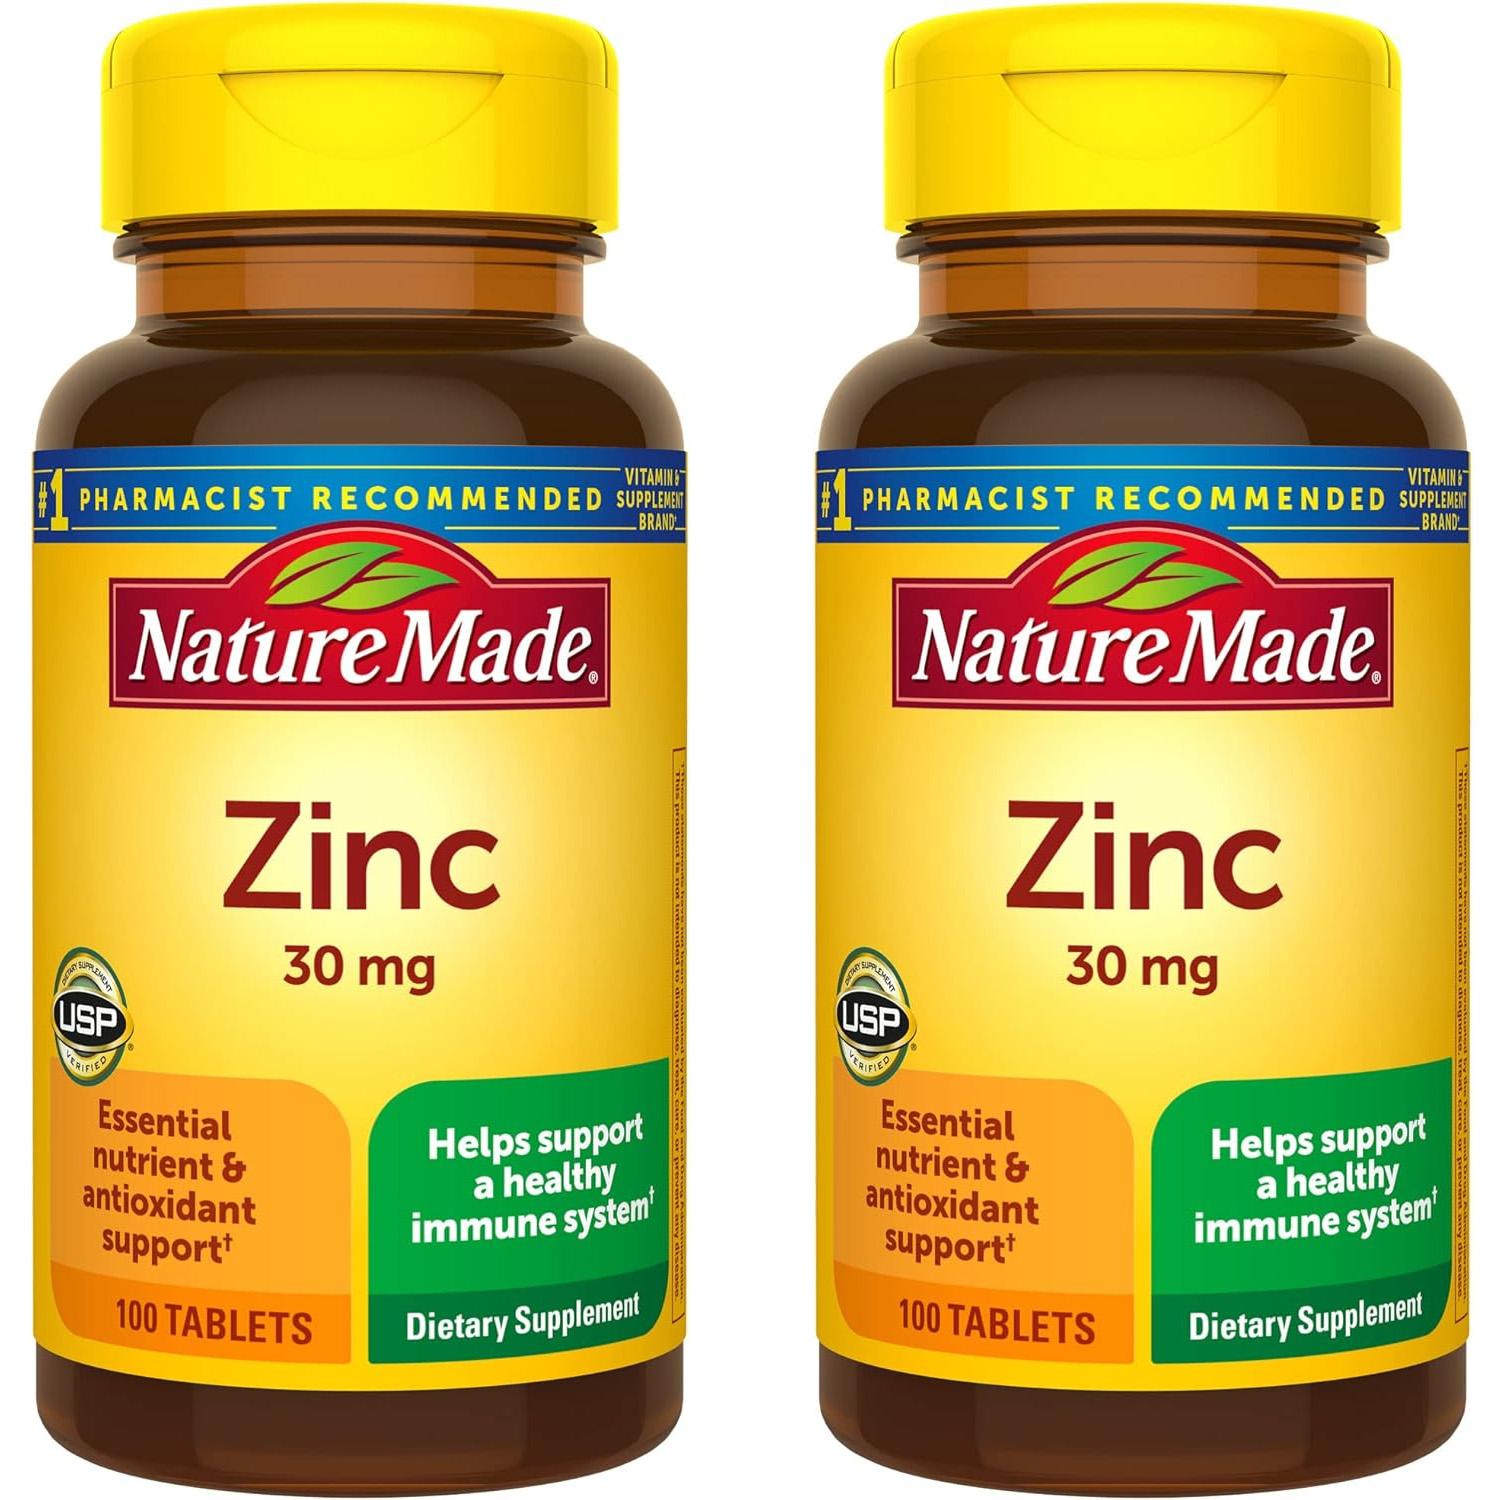 Nature Made Zinc Supplement 200 Tablets for $2.74